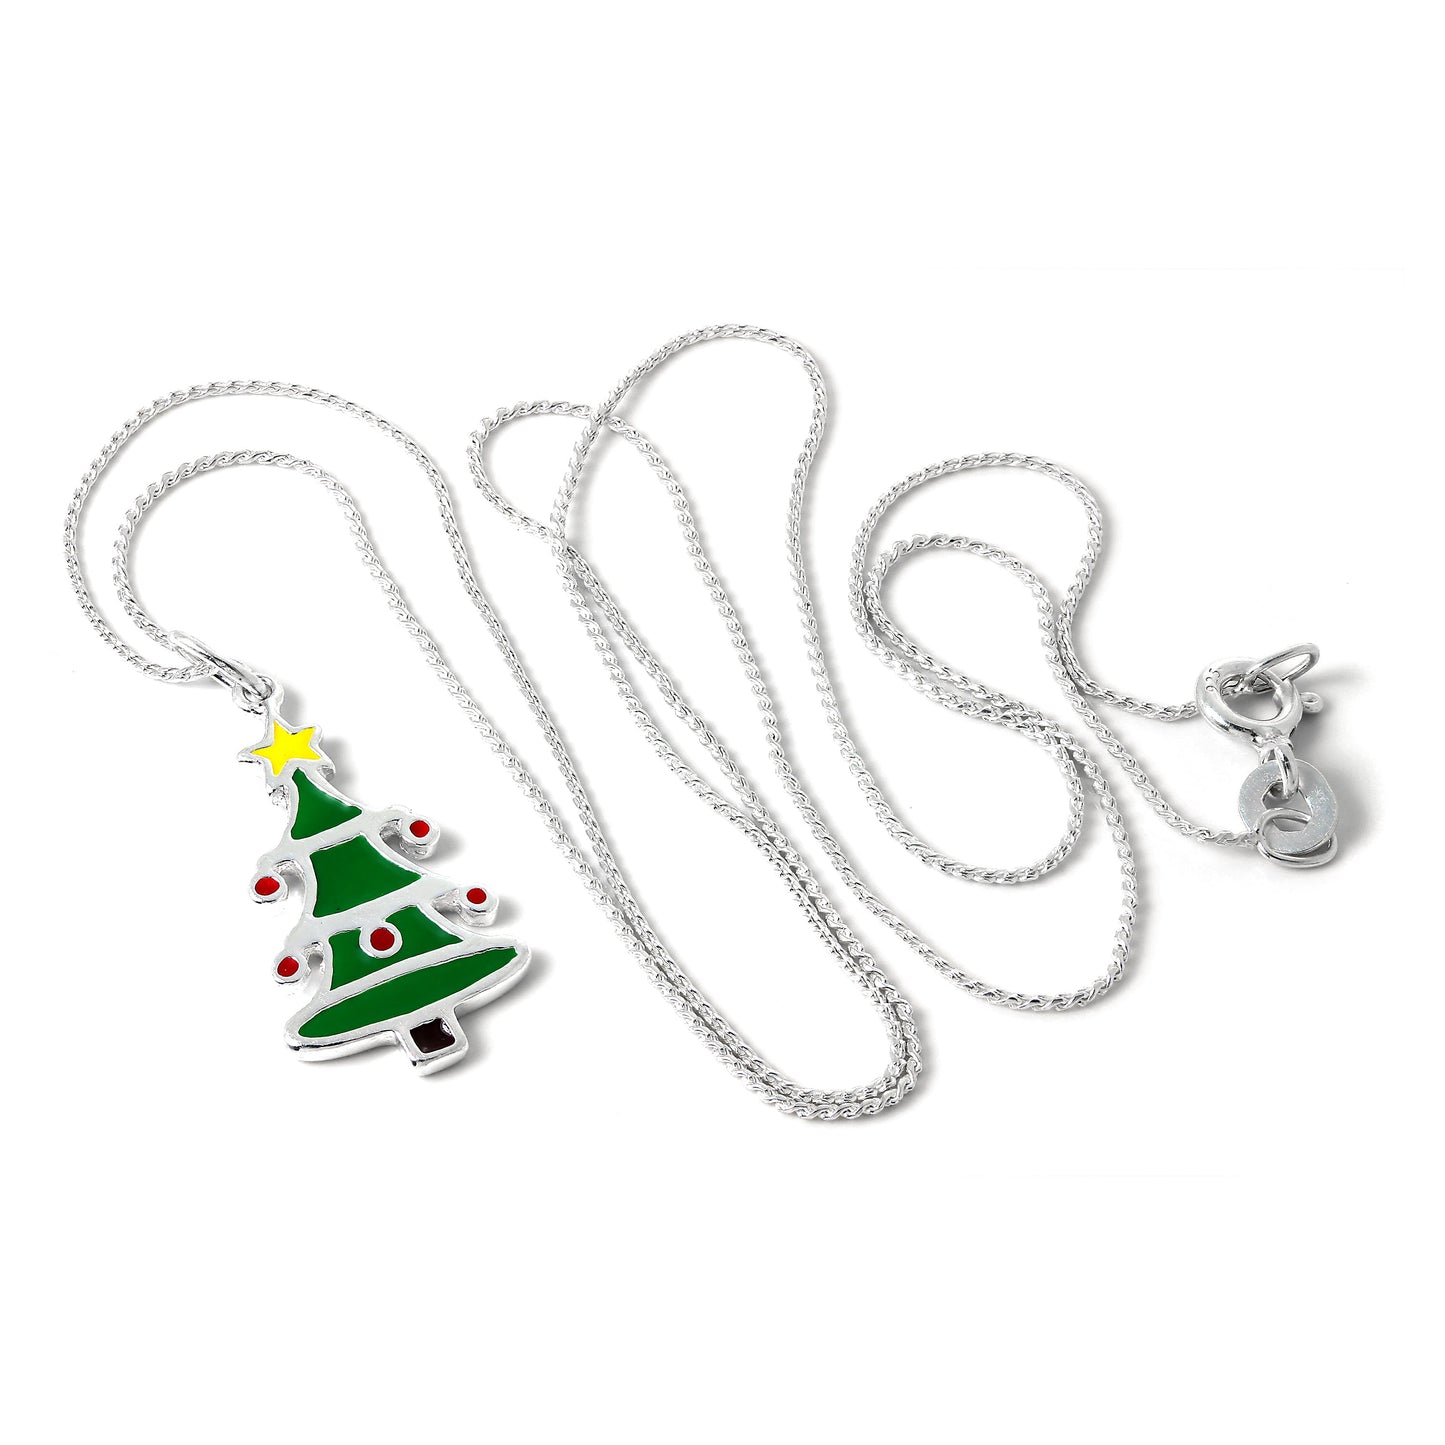 Sterling Silver Enamelled Christmas Tree Pendant Necklace 16 - 22 Inches